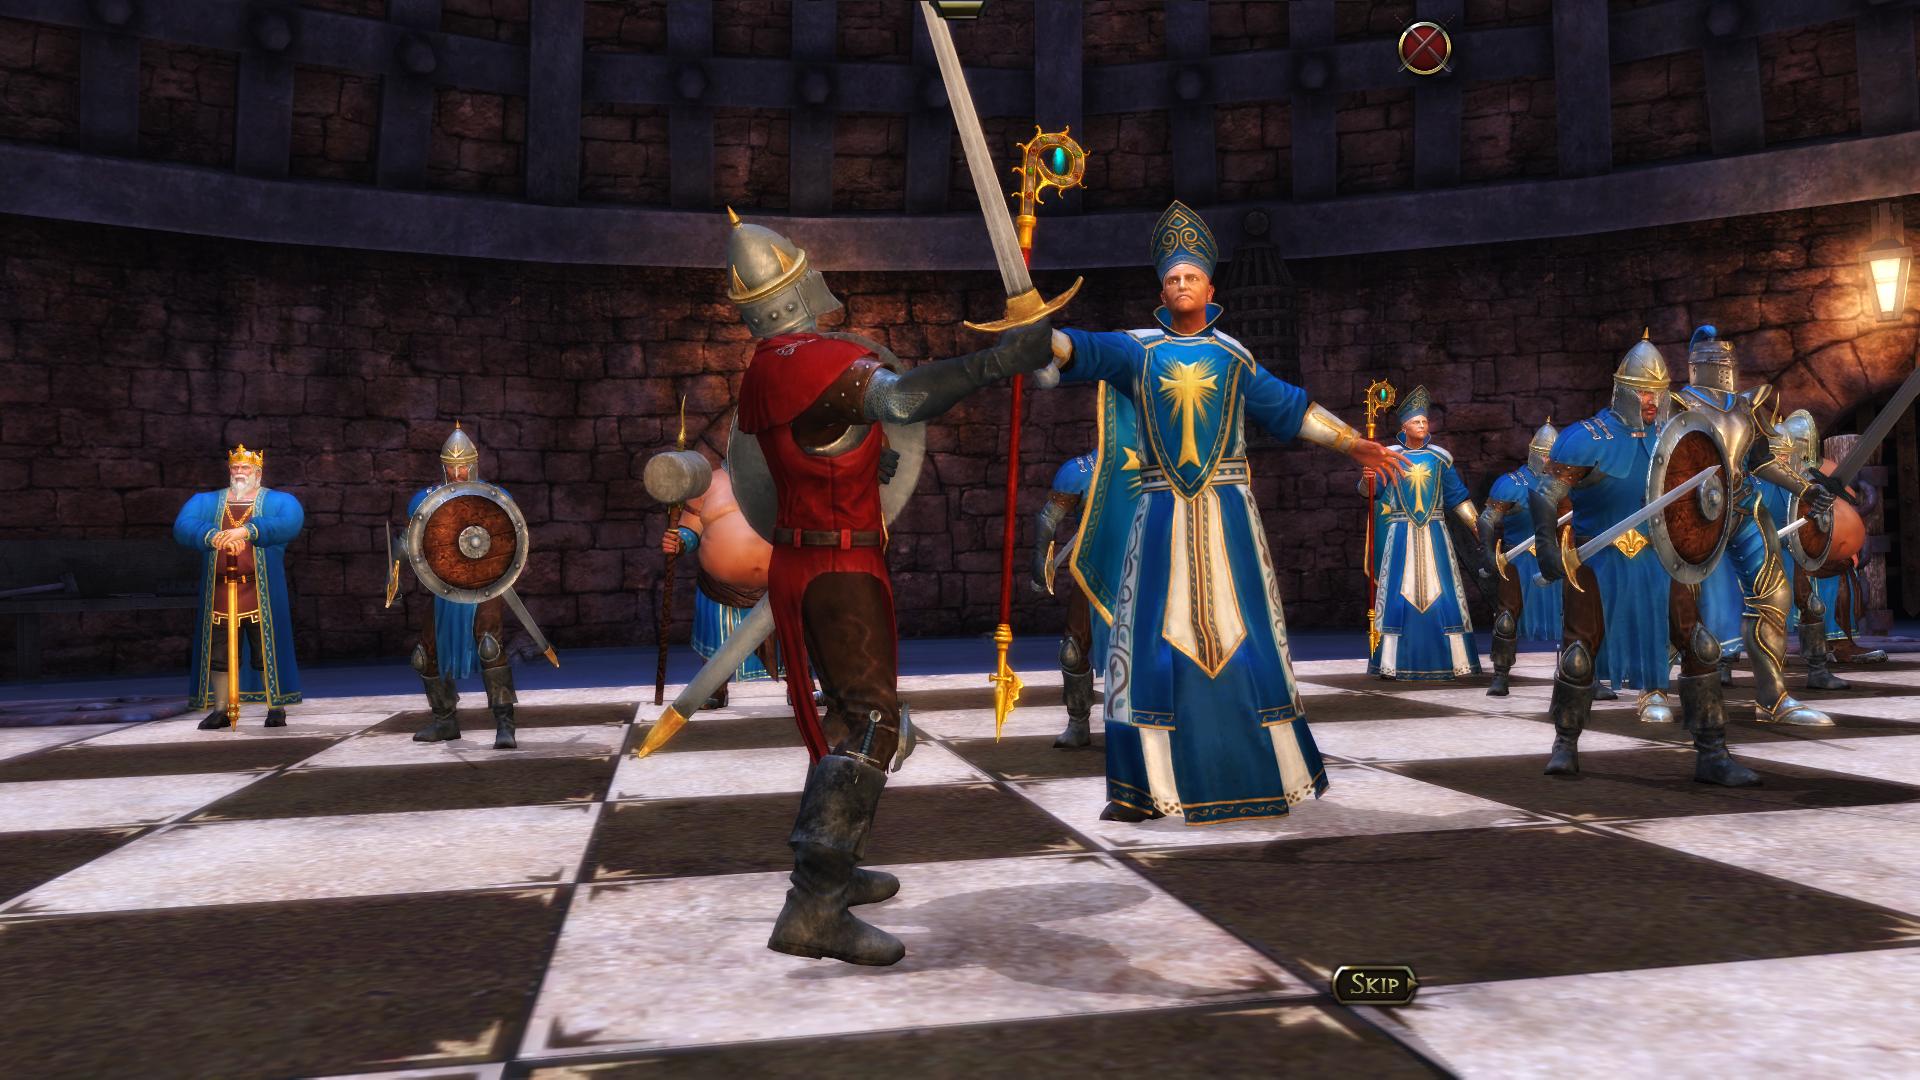 battle chess game of kings pc download